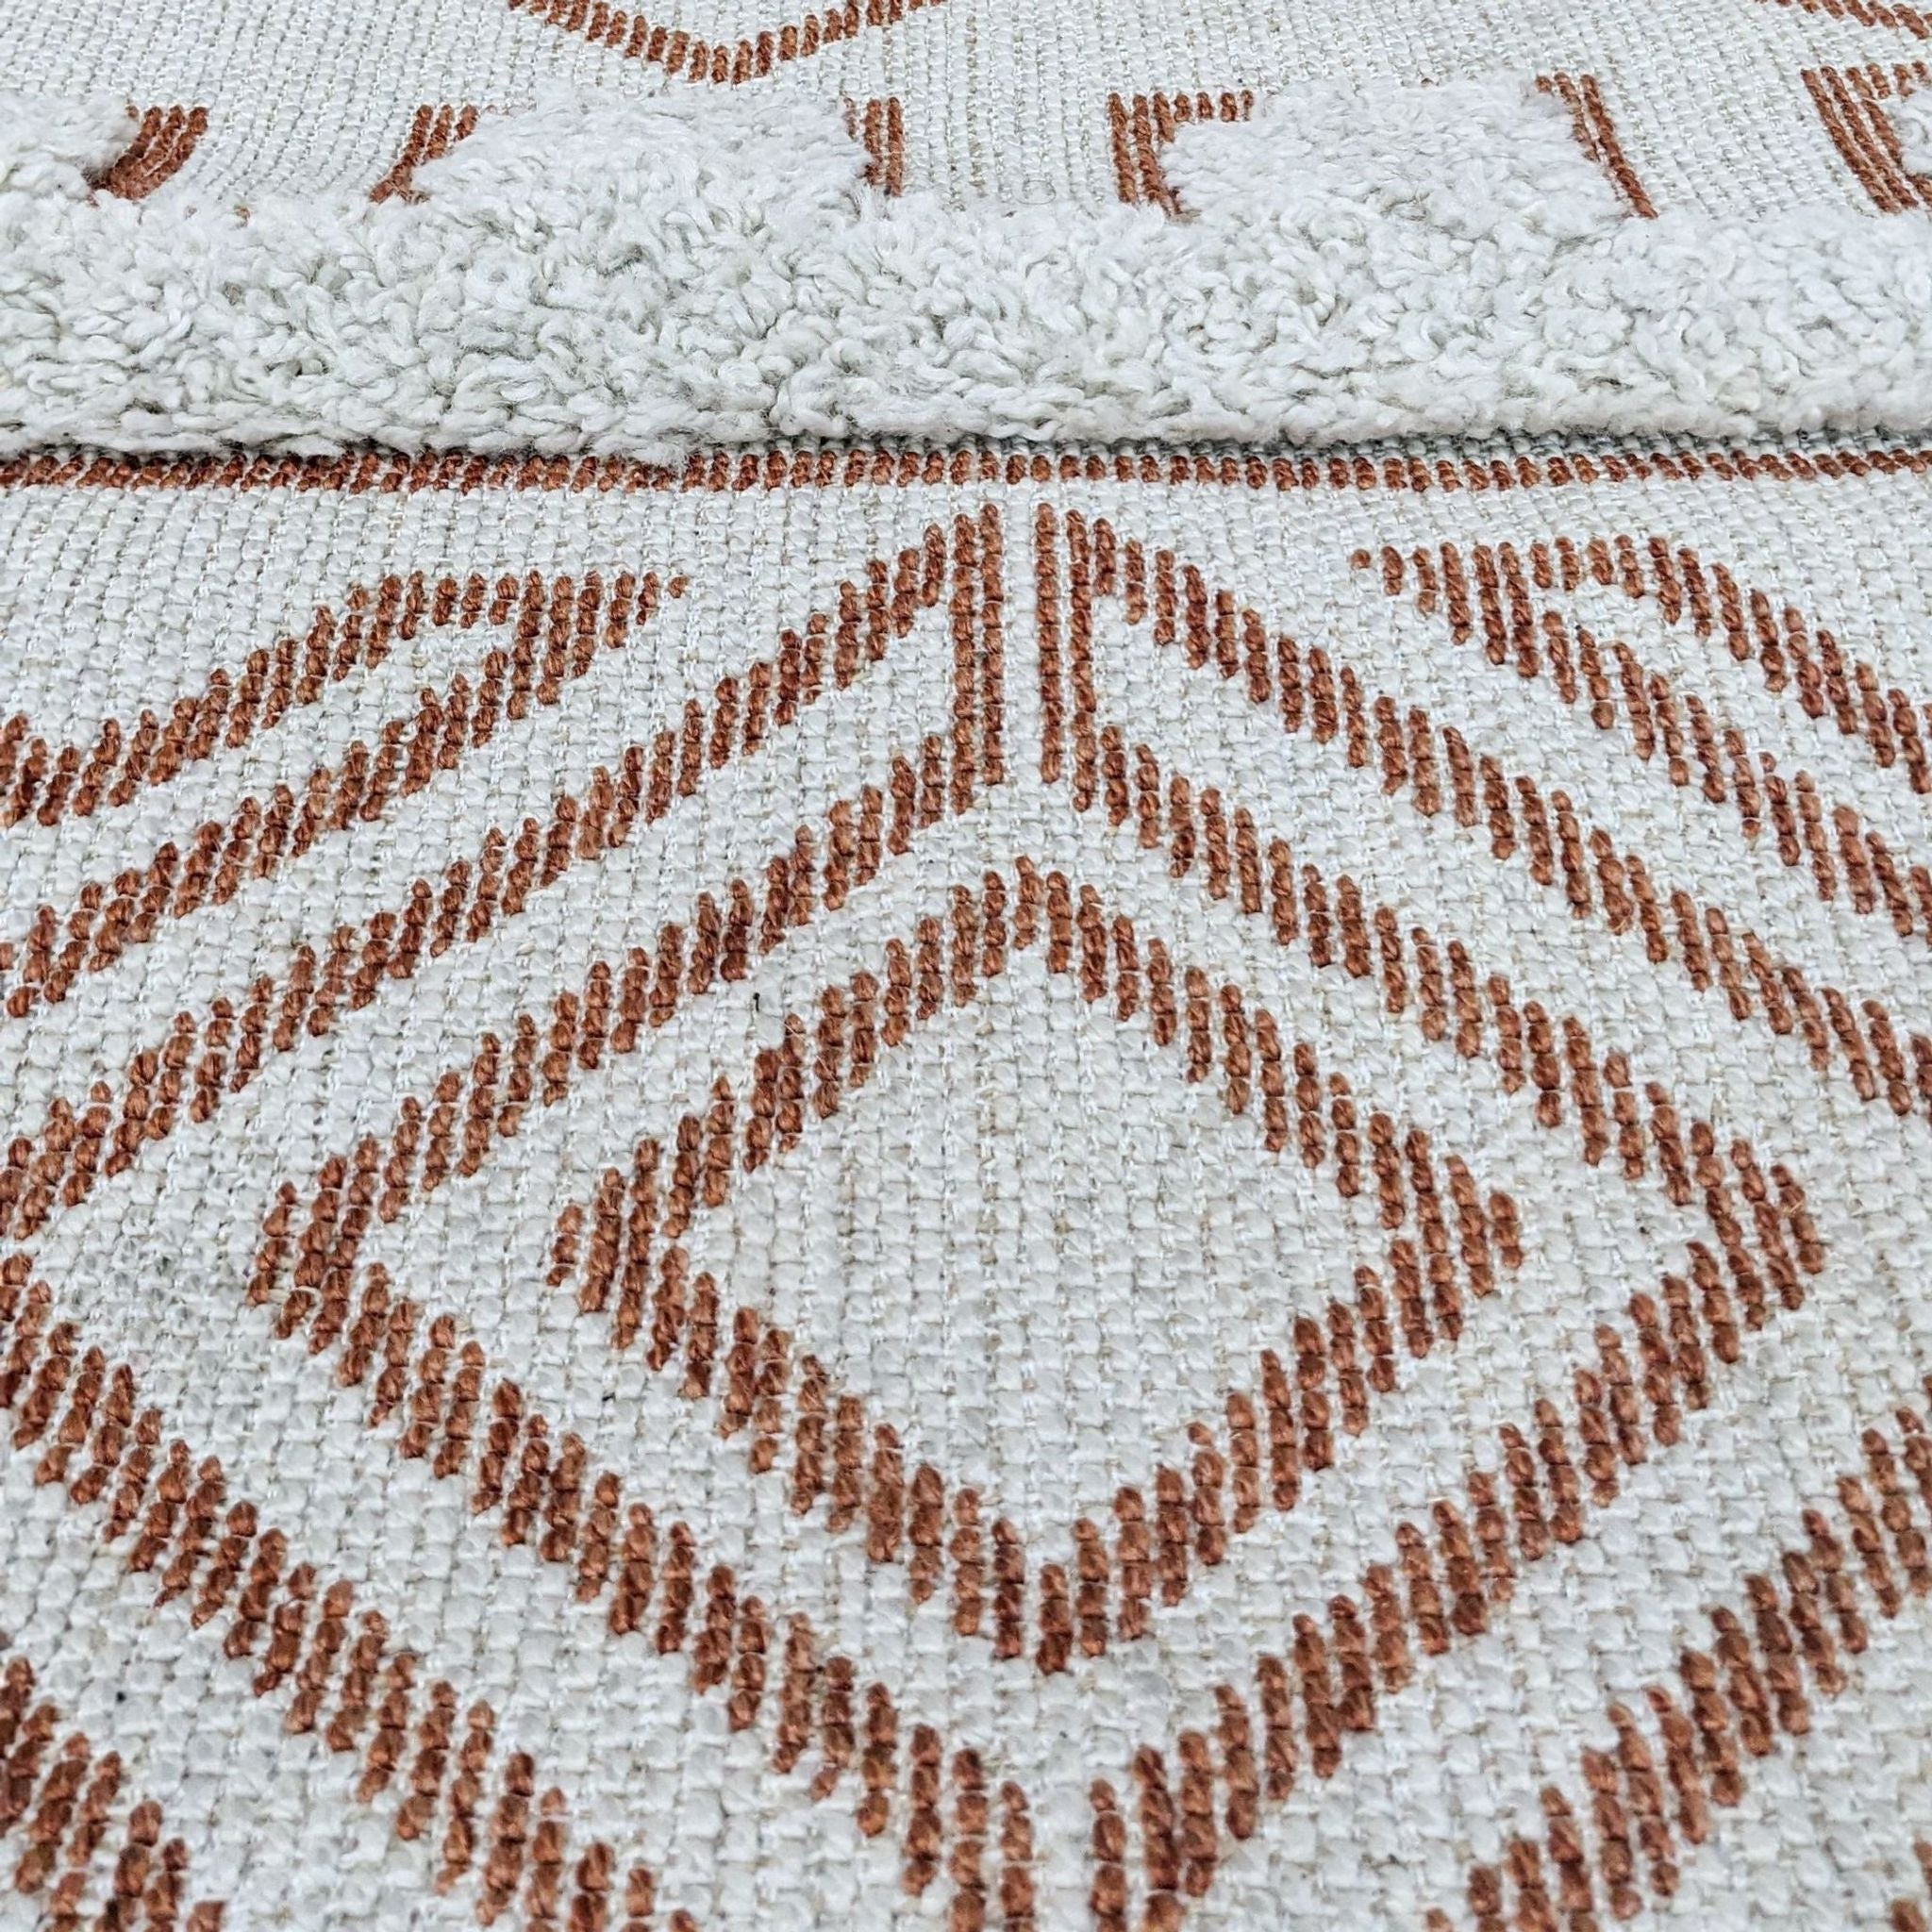 NuLoom Altos area rug displaying a tribal print in brown on a textured white high-low weave with braided tassels.